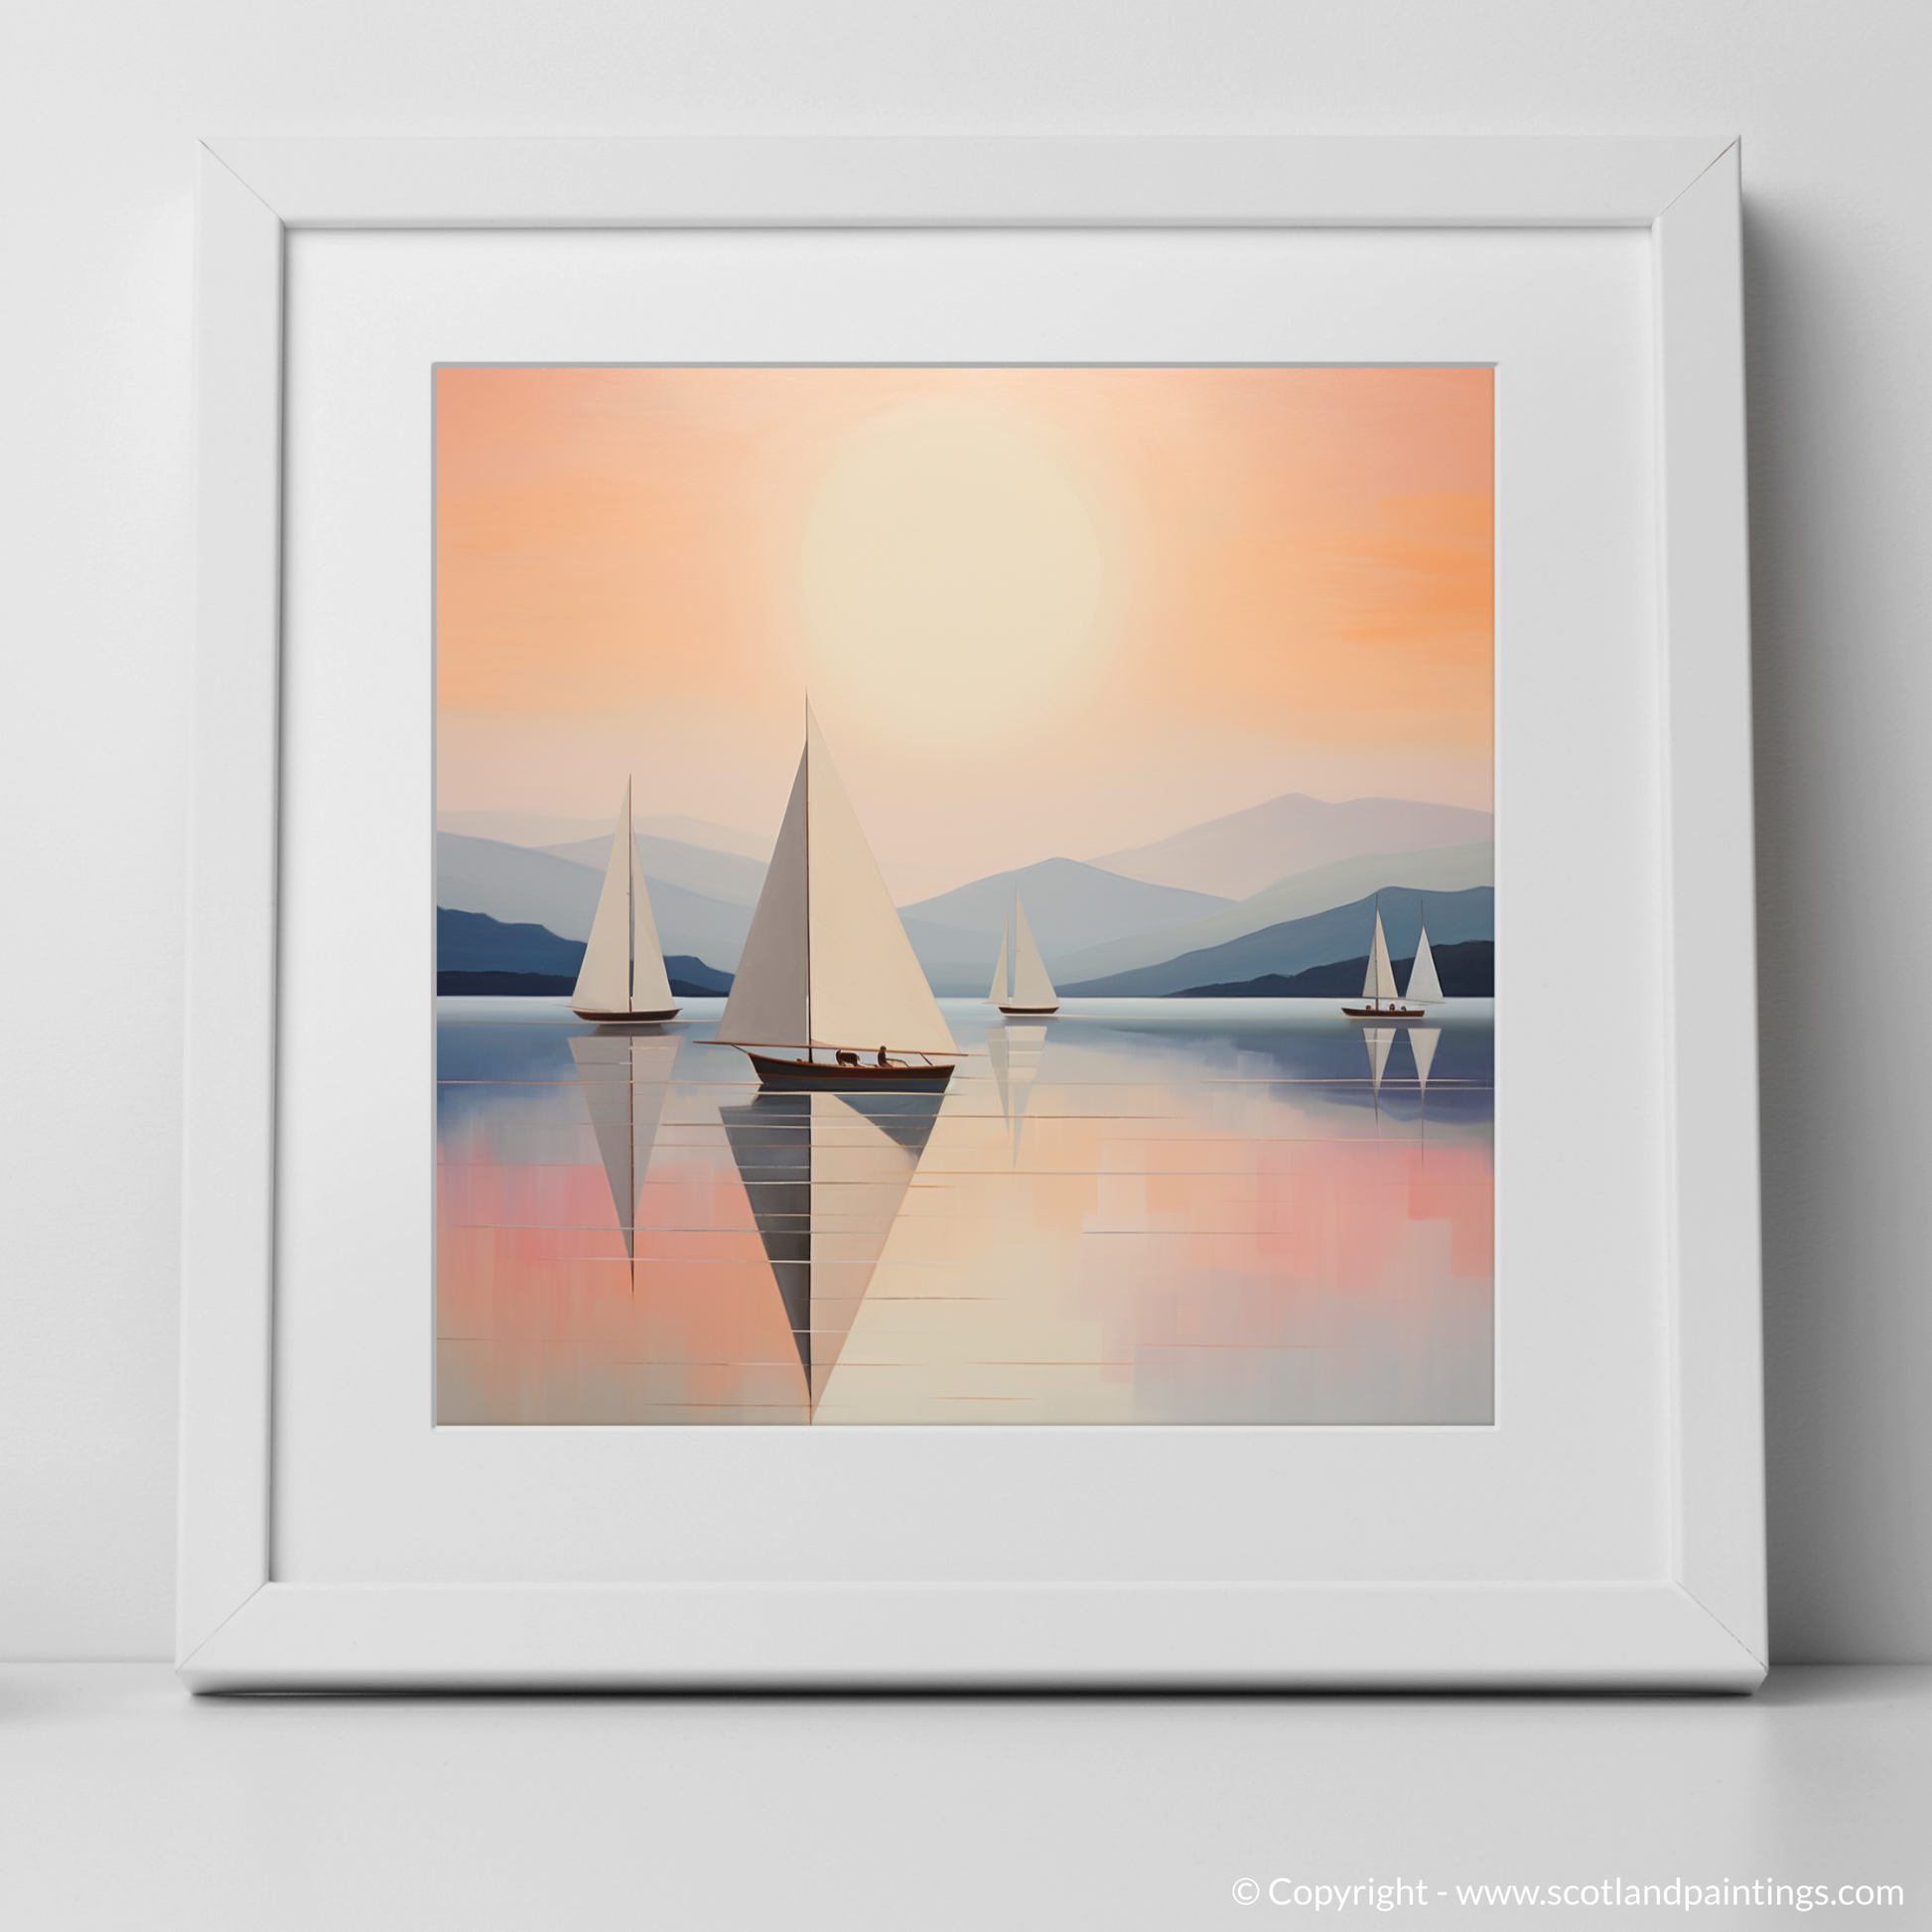 Art Print of Sailing boats on Loch Lomond at sunset with a white frame